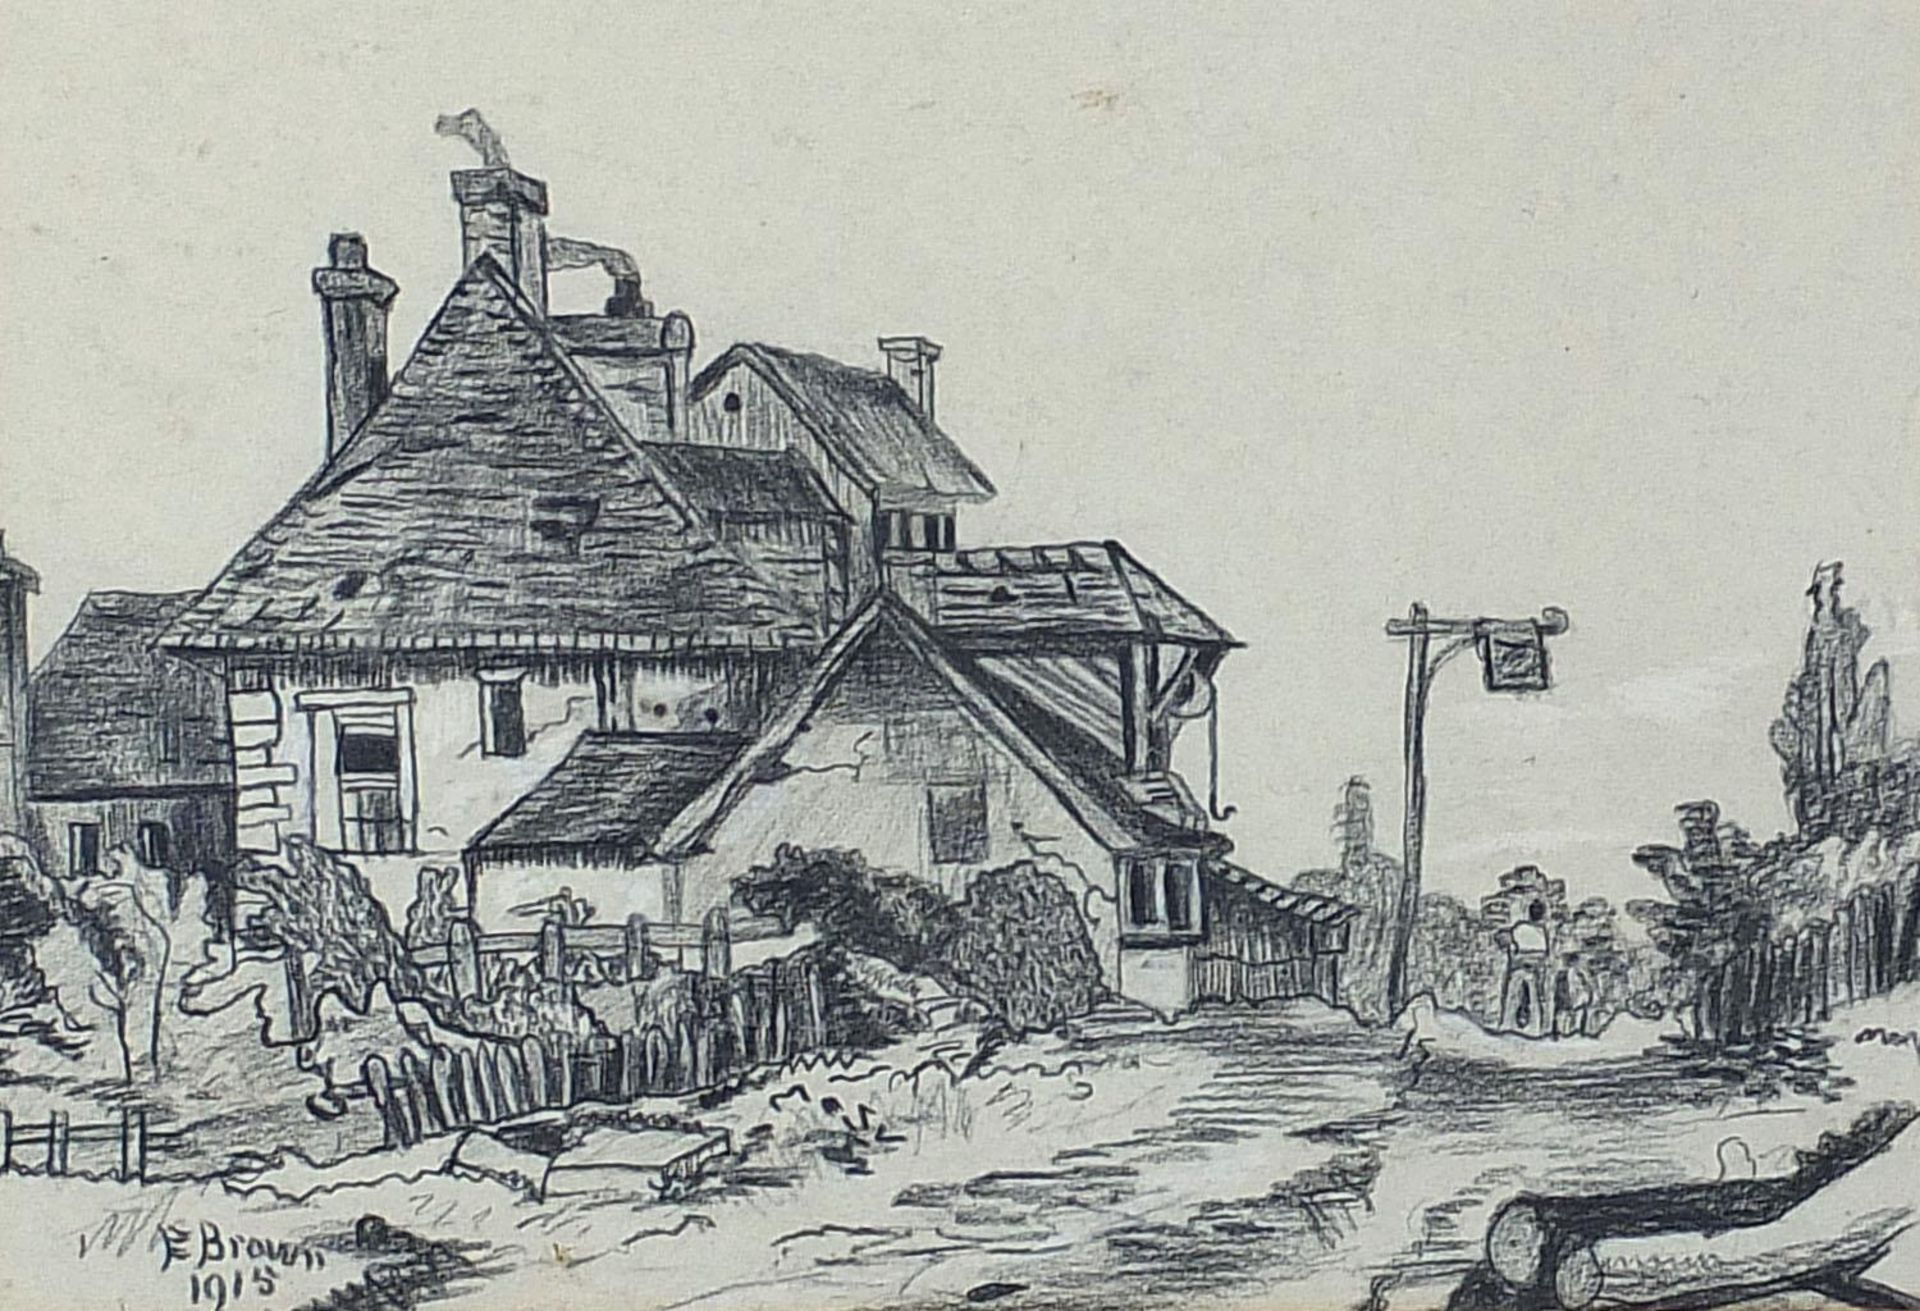 E Brown 1915 - House beside a path, early 20th century heightened pencil sketch, Wilfrid Coates